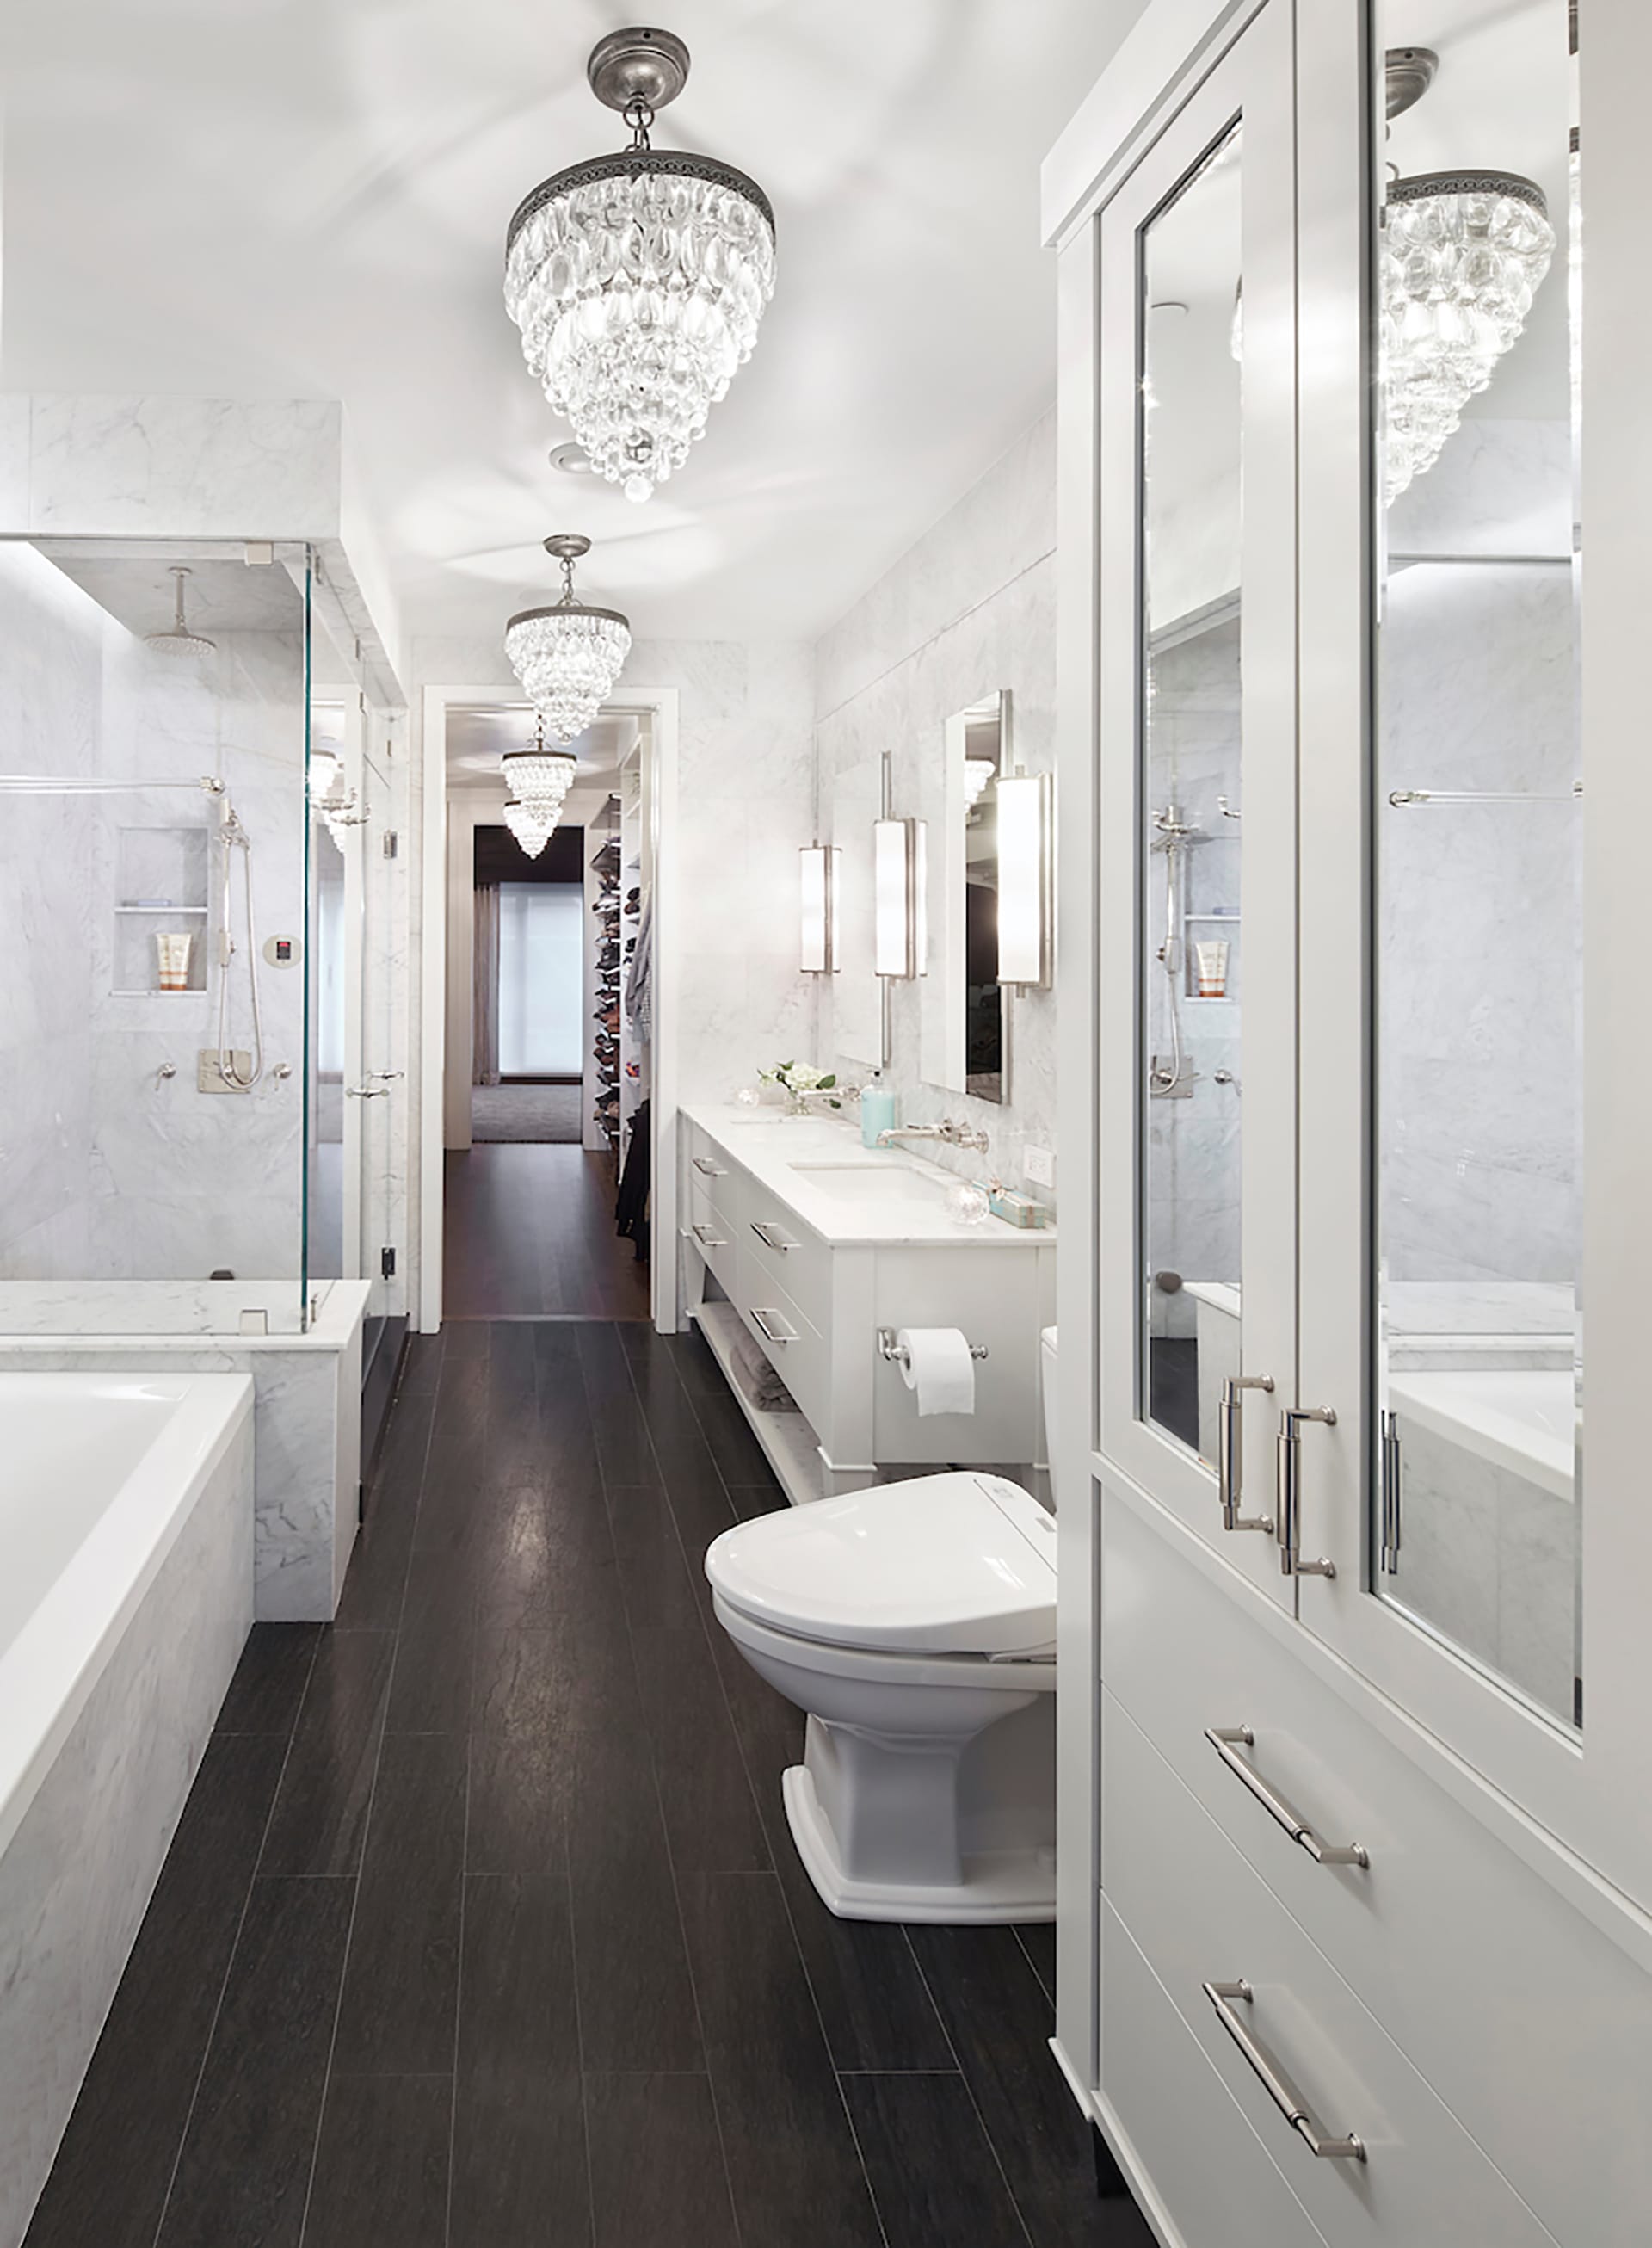 Primary bathroom with multiple chandeliers and marble floors and walls